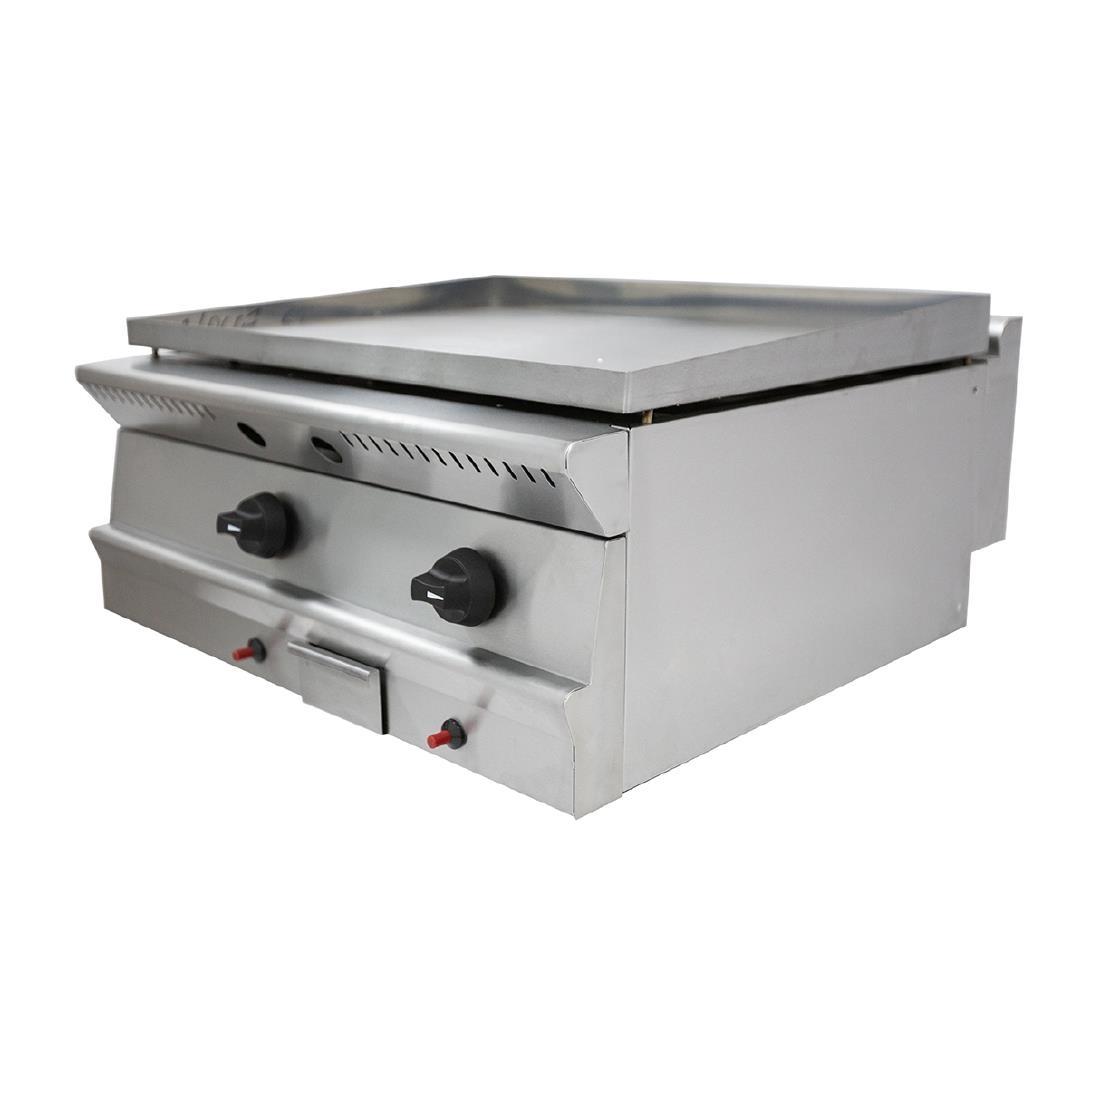 Parry Double Natural Gas Griddle PGG7 - GM799-N  - 3